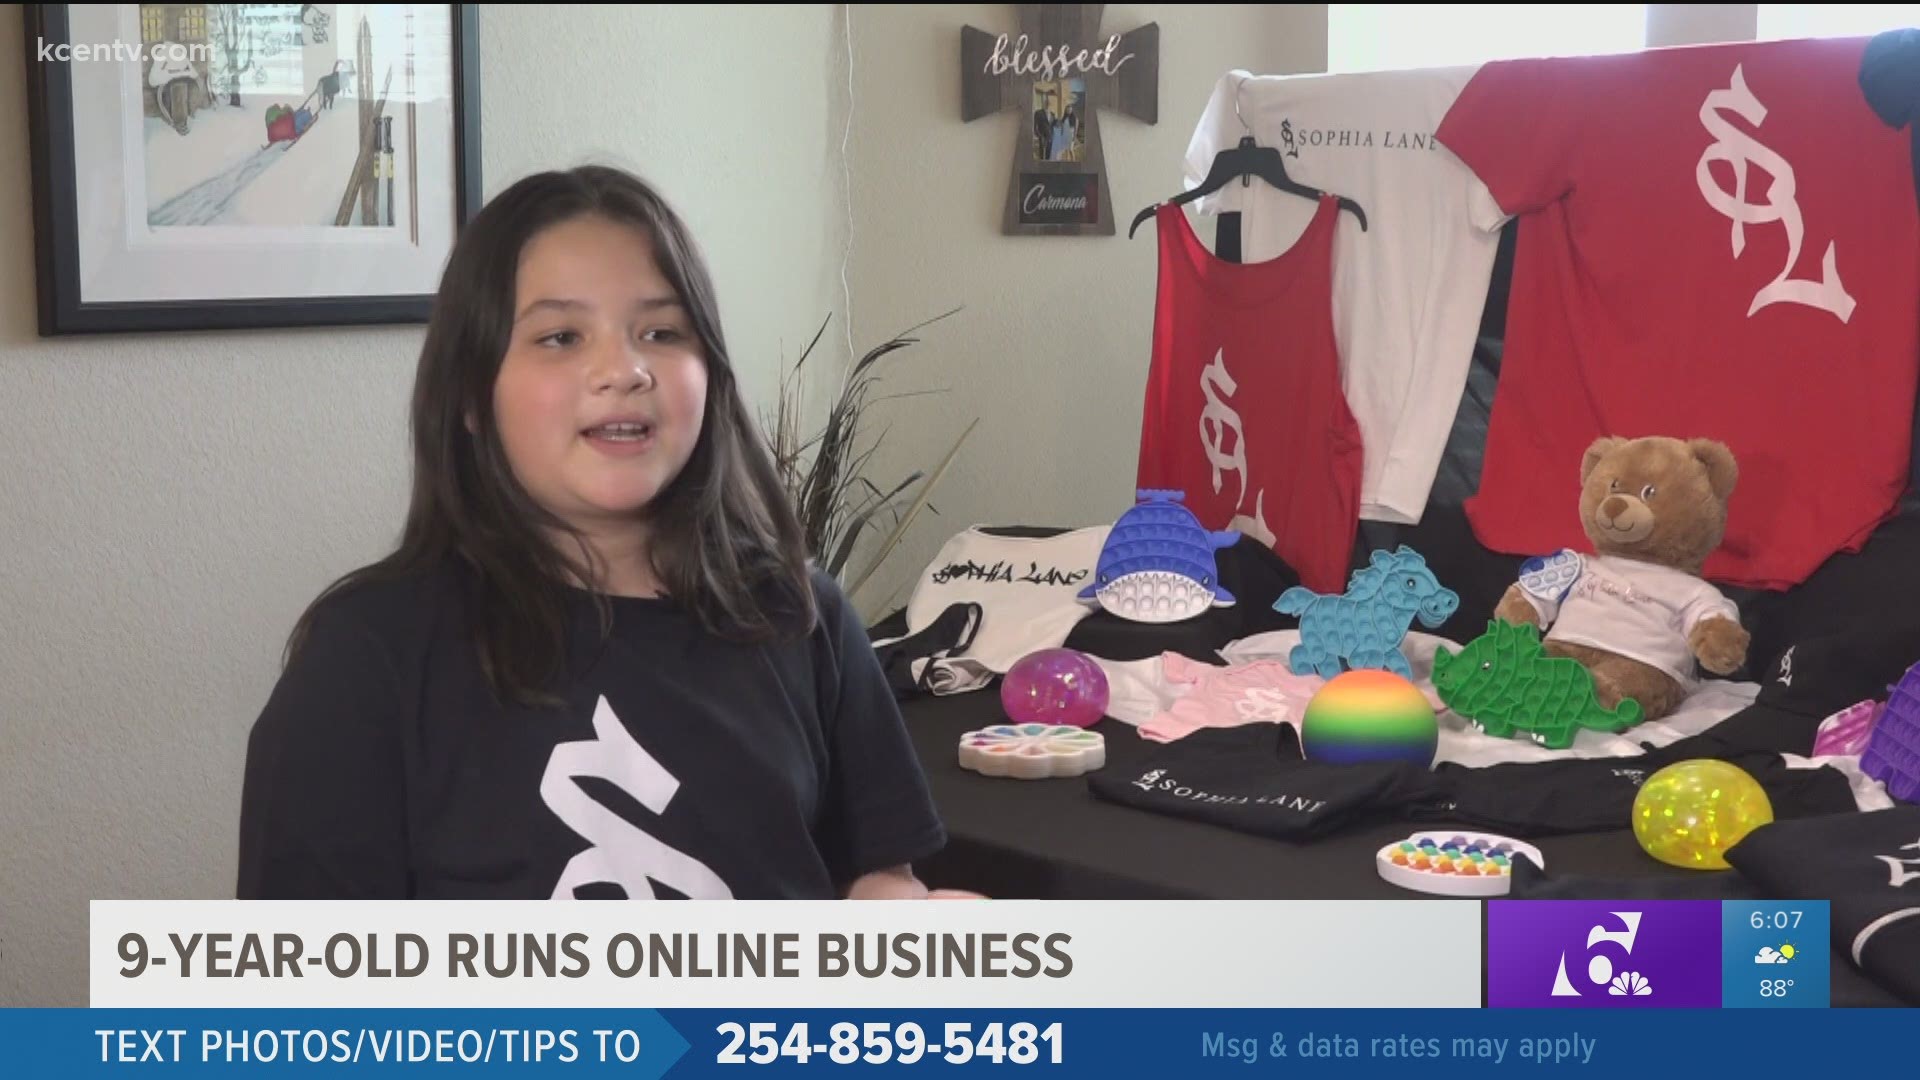 At just 9-year-old Sophia Carmona is getting real-world experience and encourages other kids her age to follow their dreams, just like she is doing.